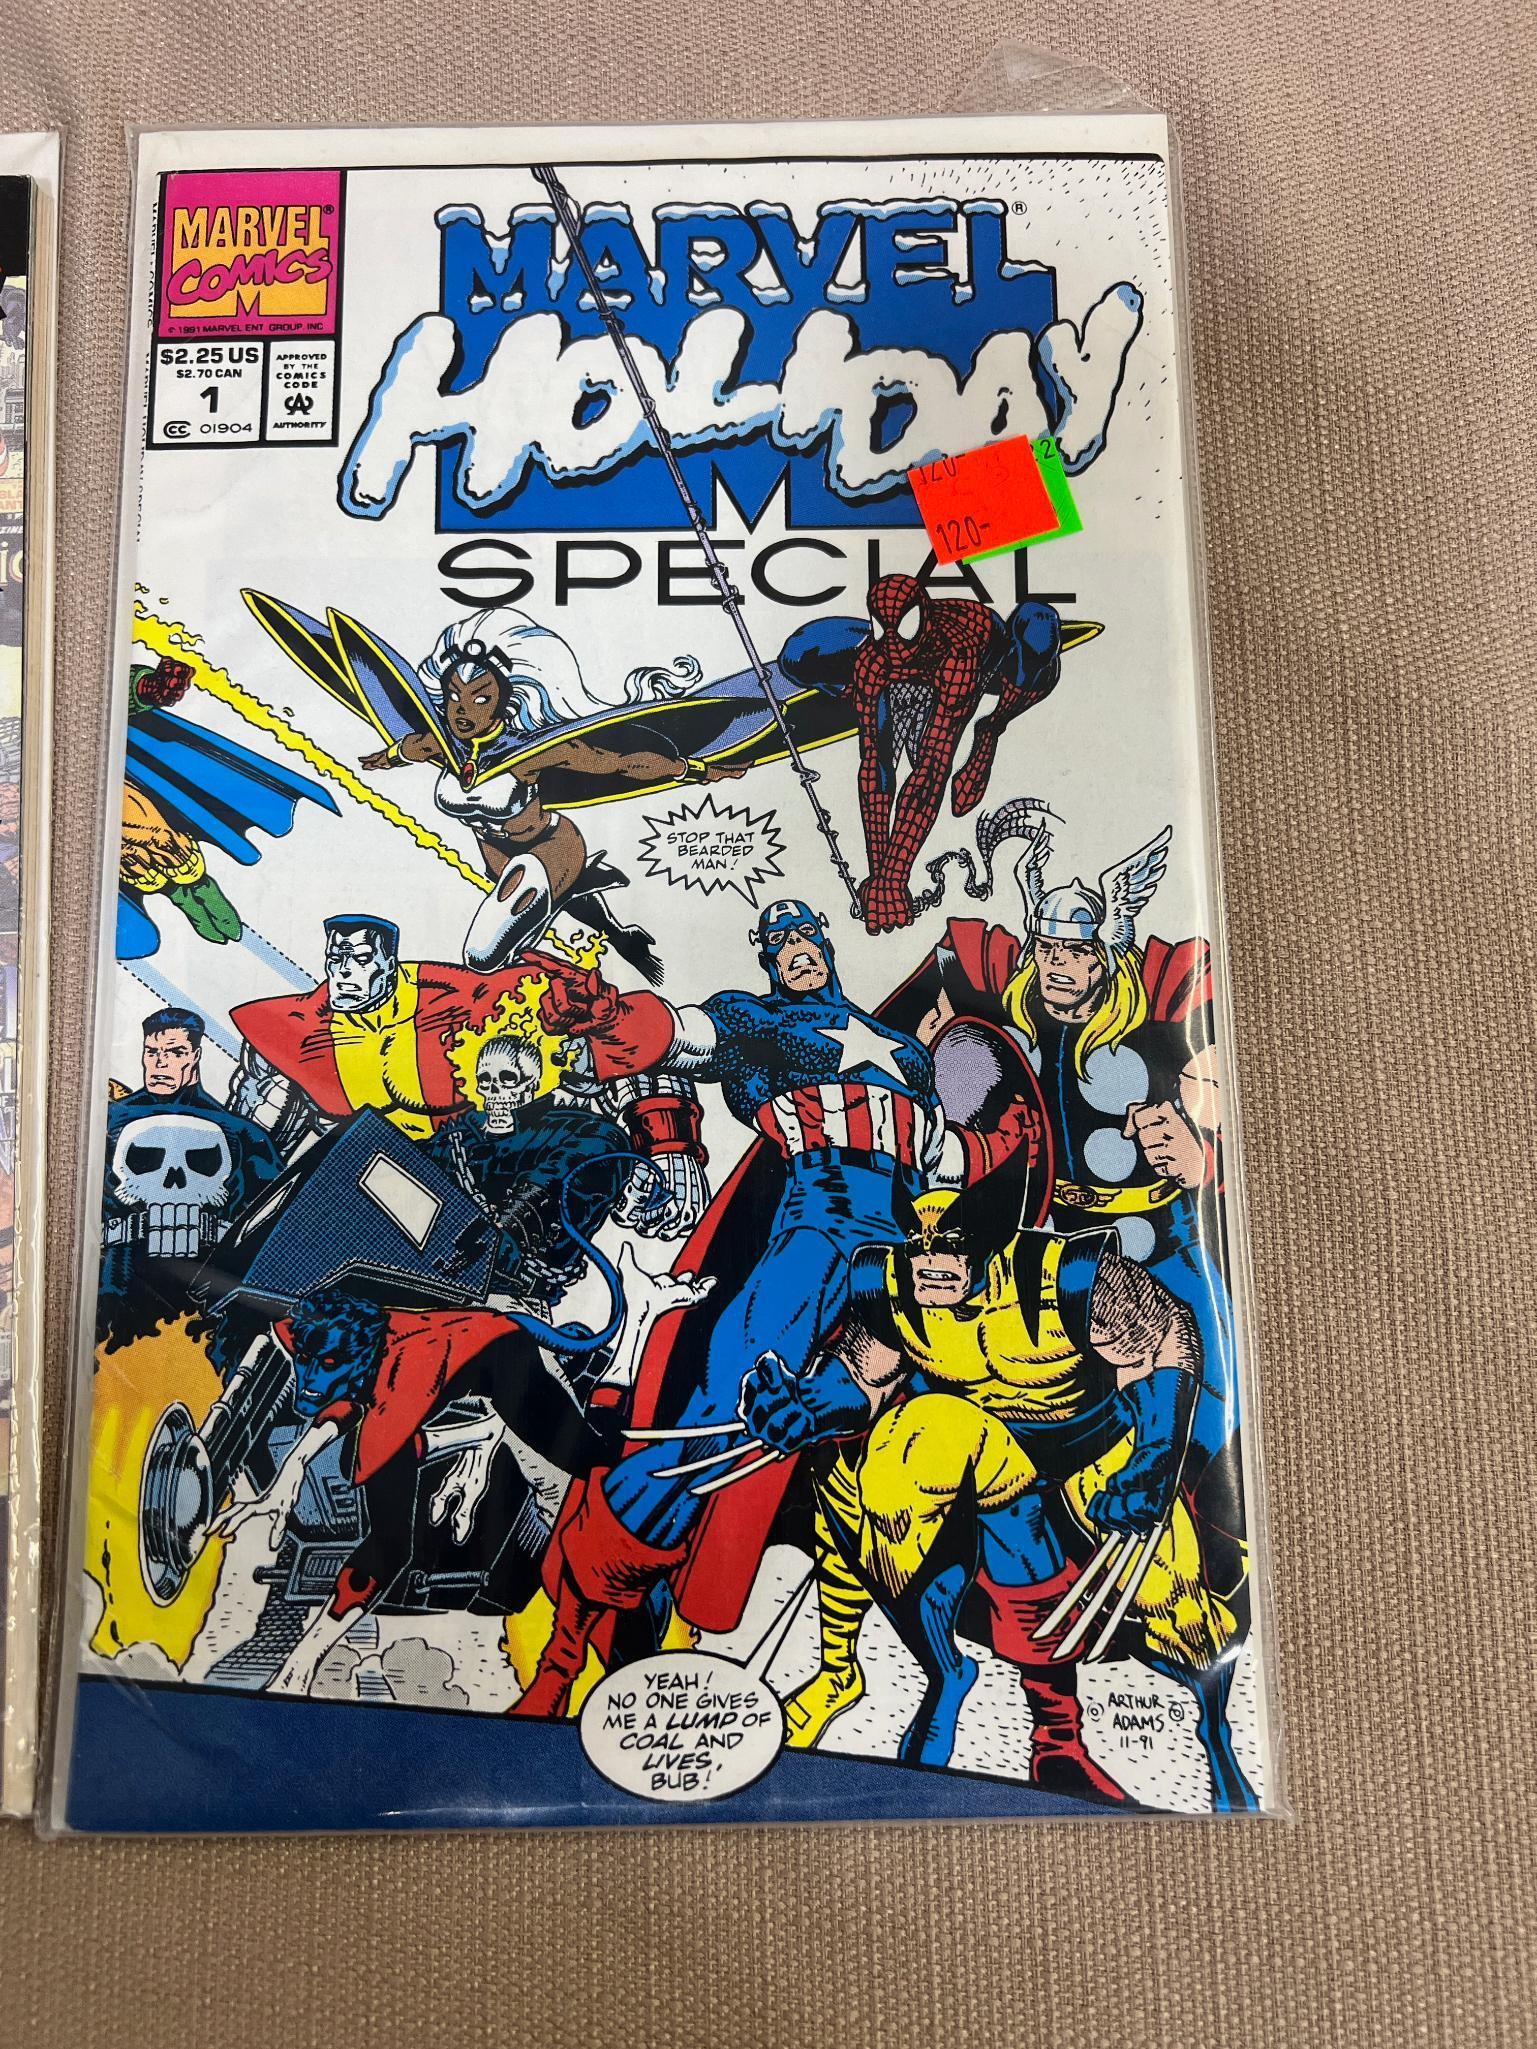 Marvel Holiday Special and 100 Page Monster Black Panther comic books